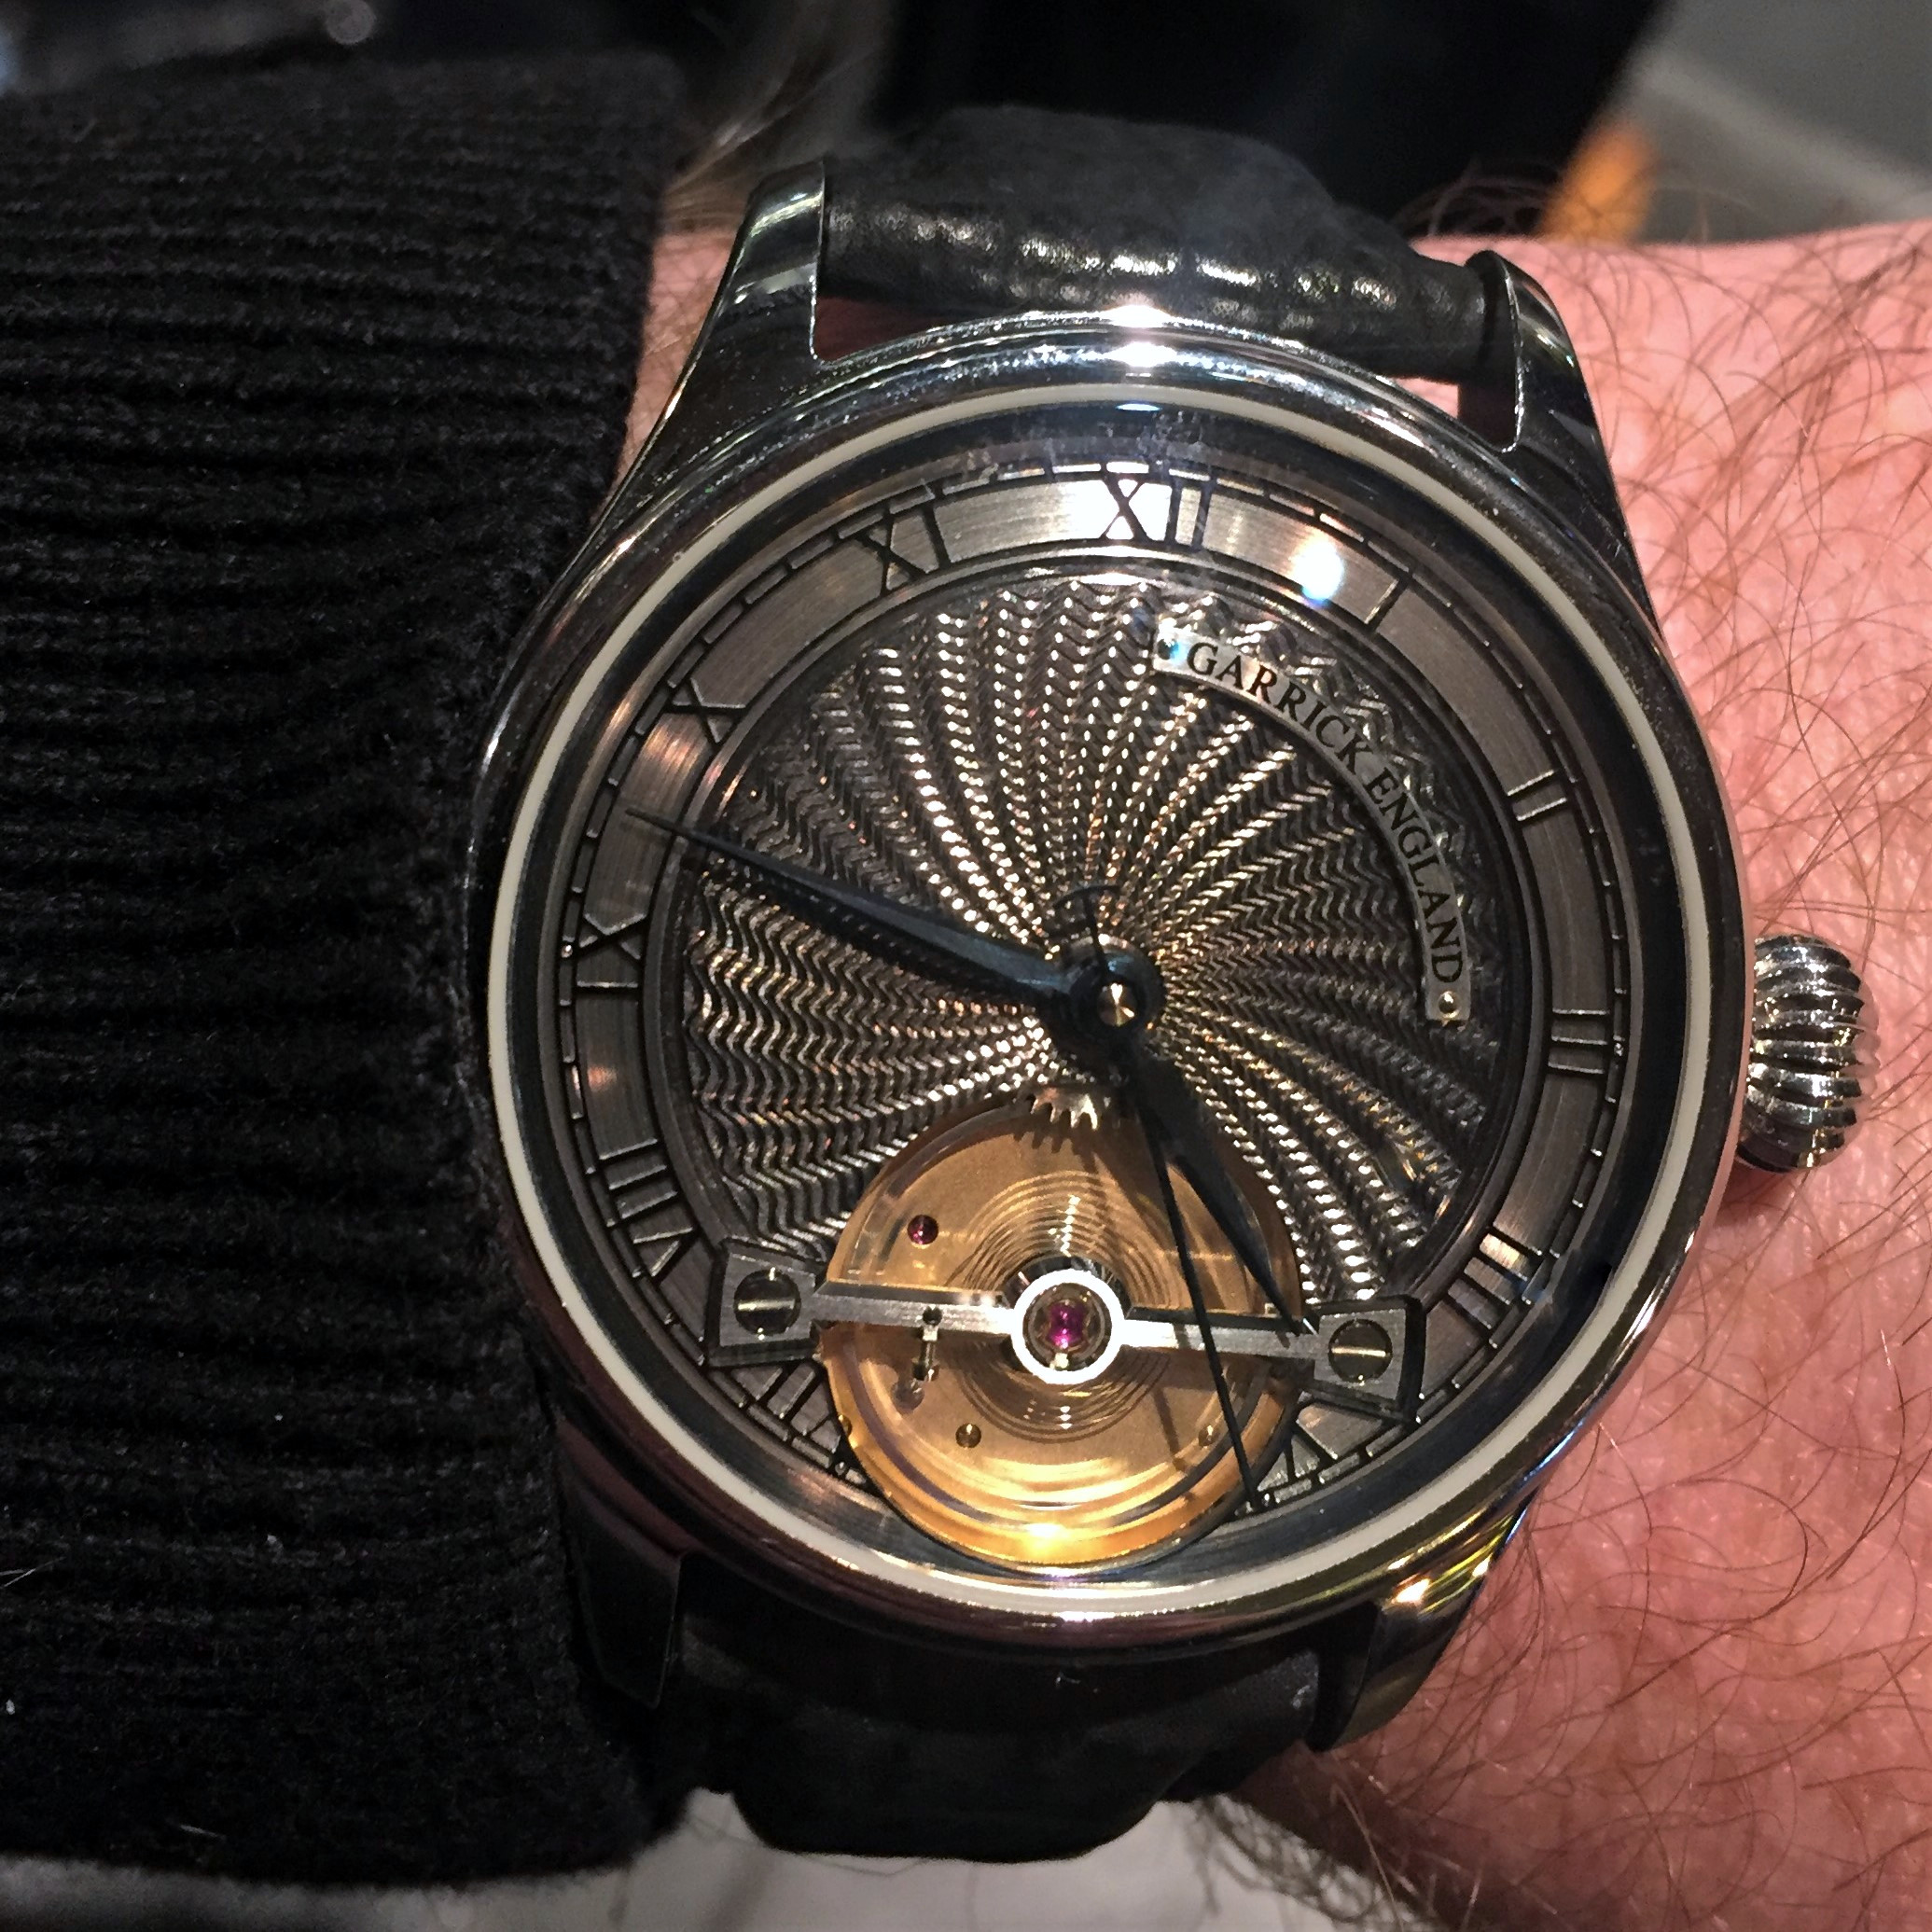 Garrick S2 at Watchmakers Club